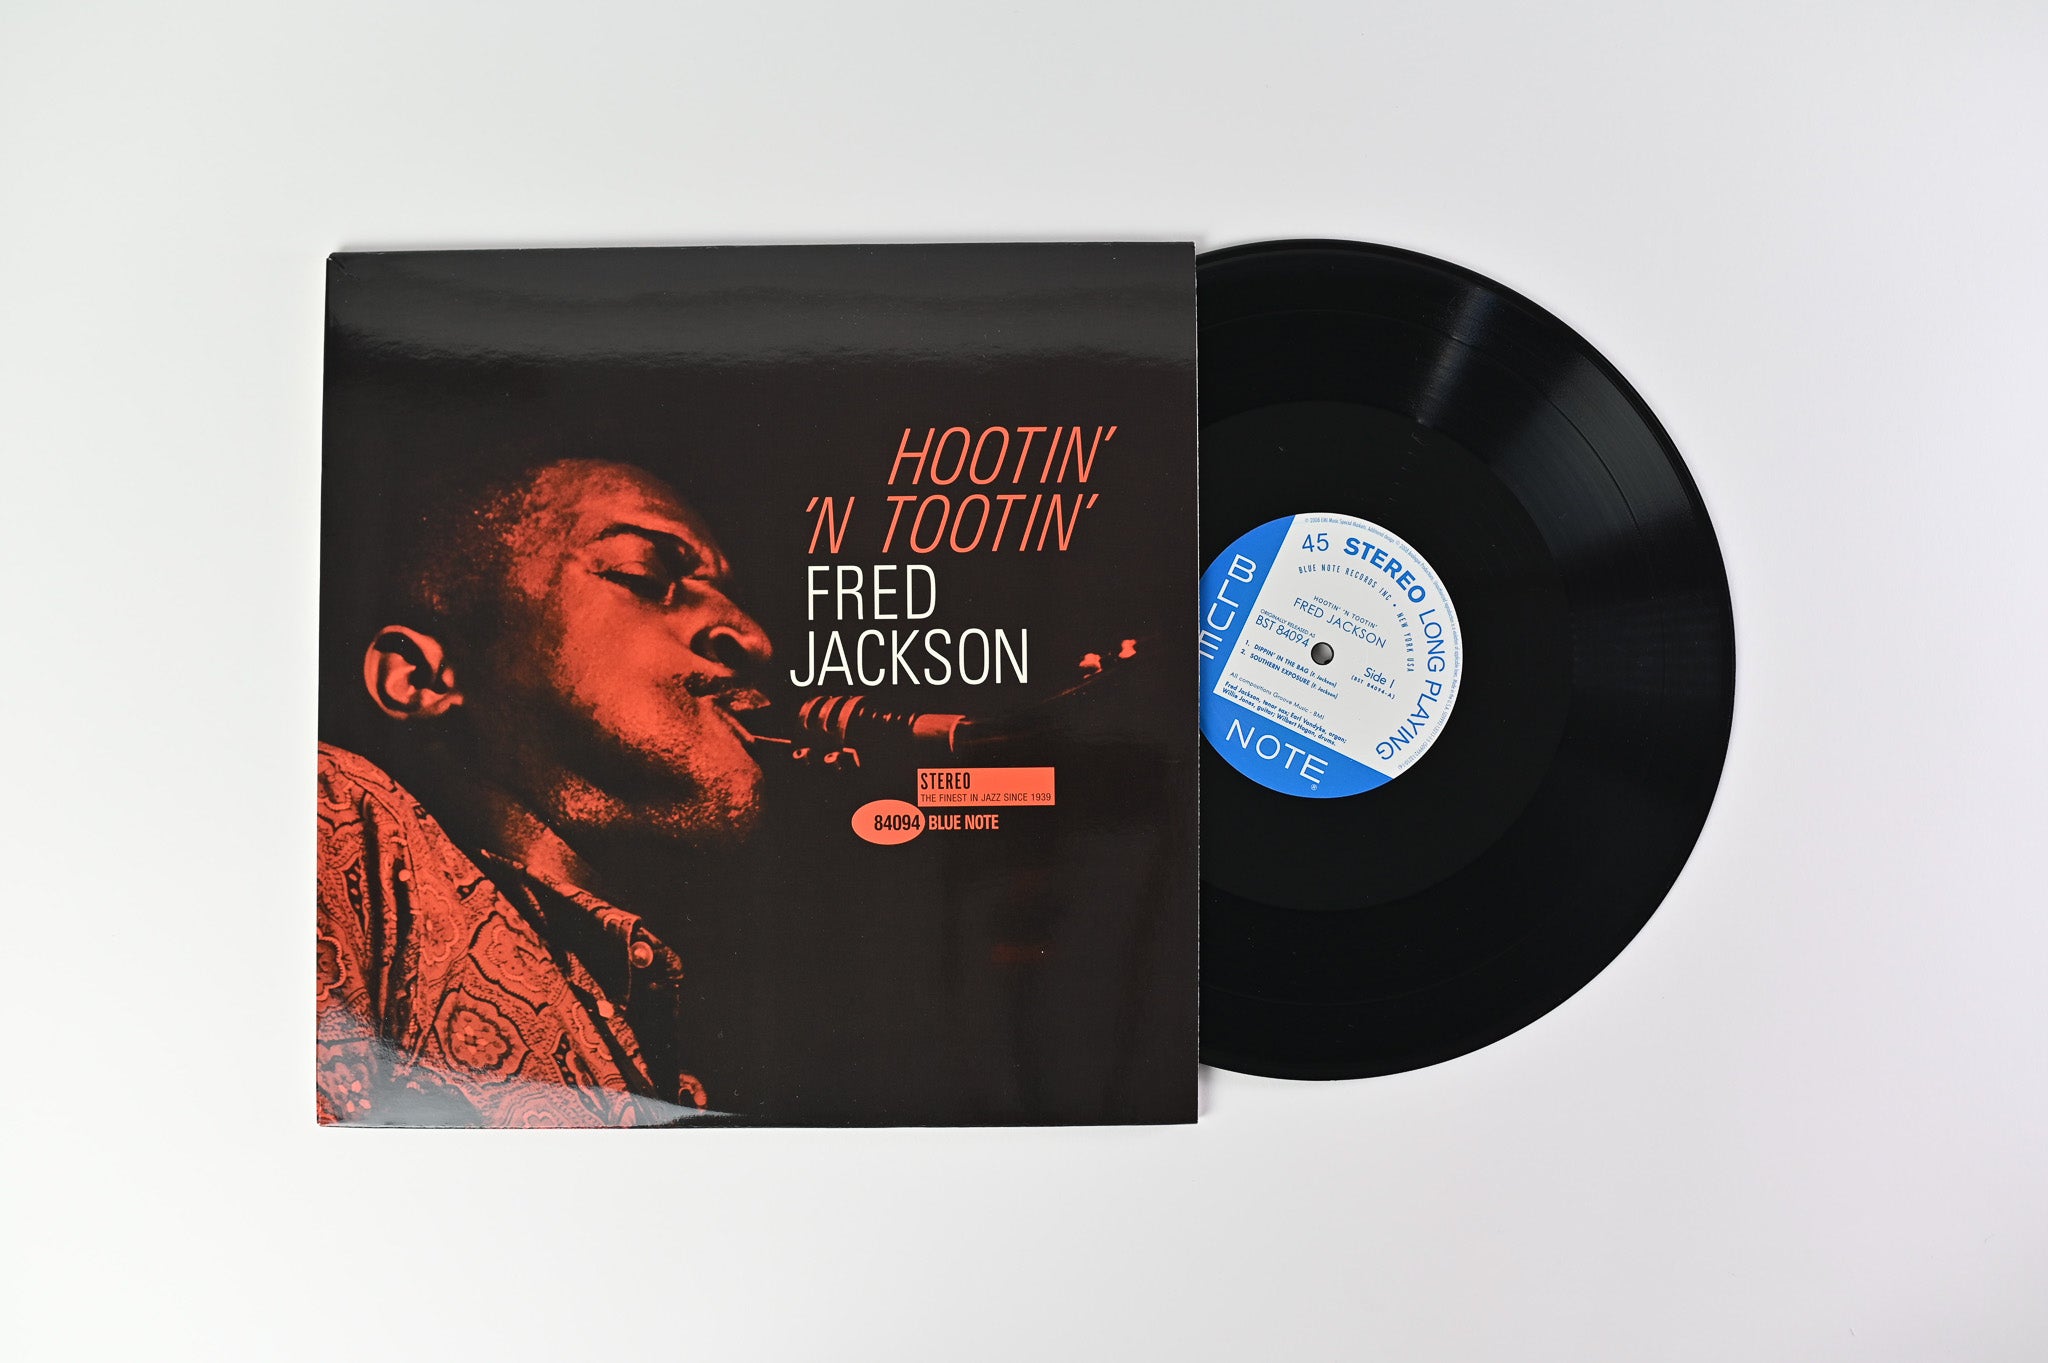 Fred Jackson - Hootin' 'N Tootin' on Blue Note Analogue Productions Reissue Numbered 45 RPM